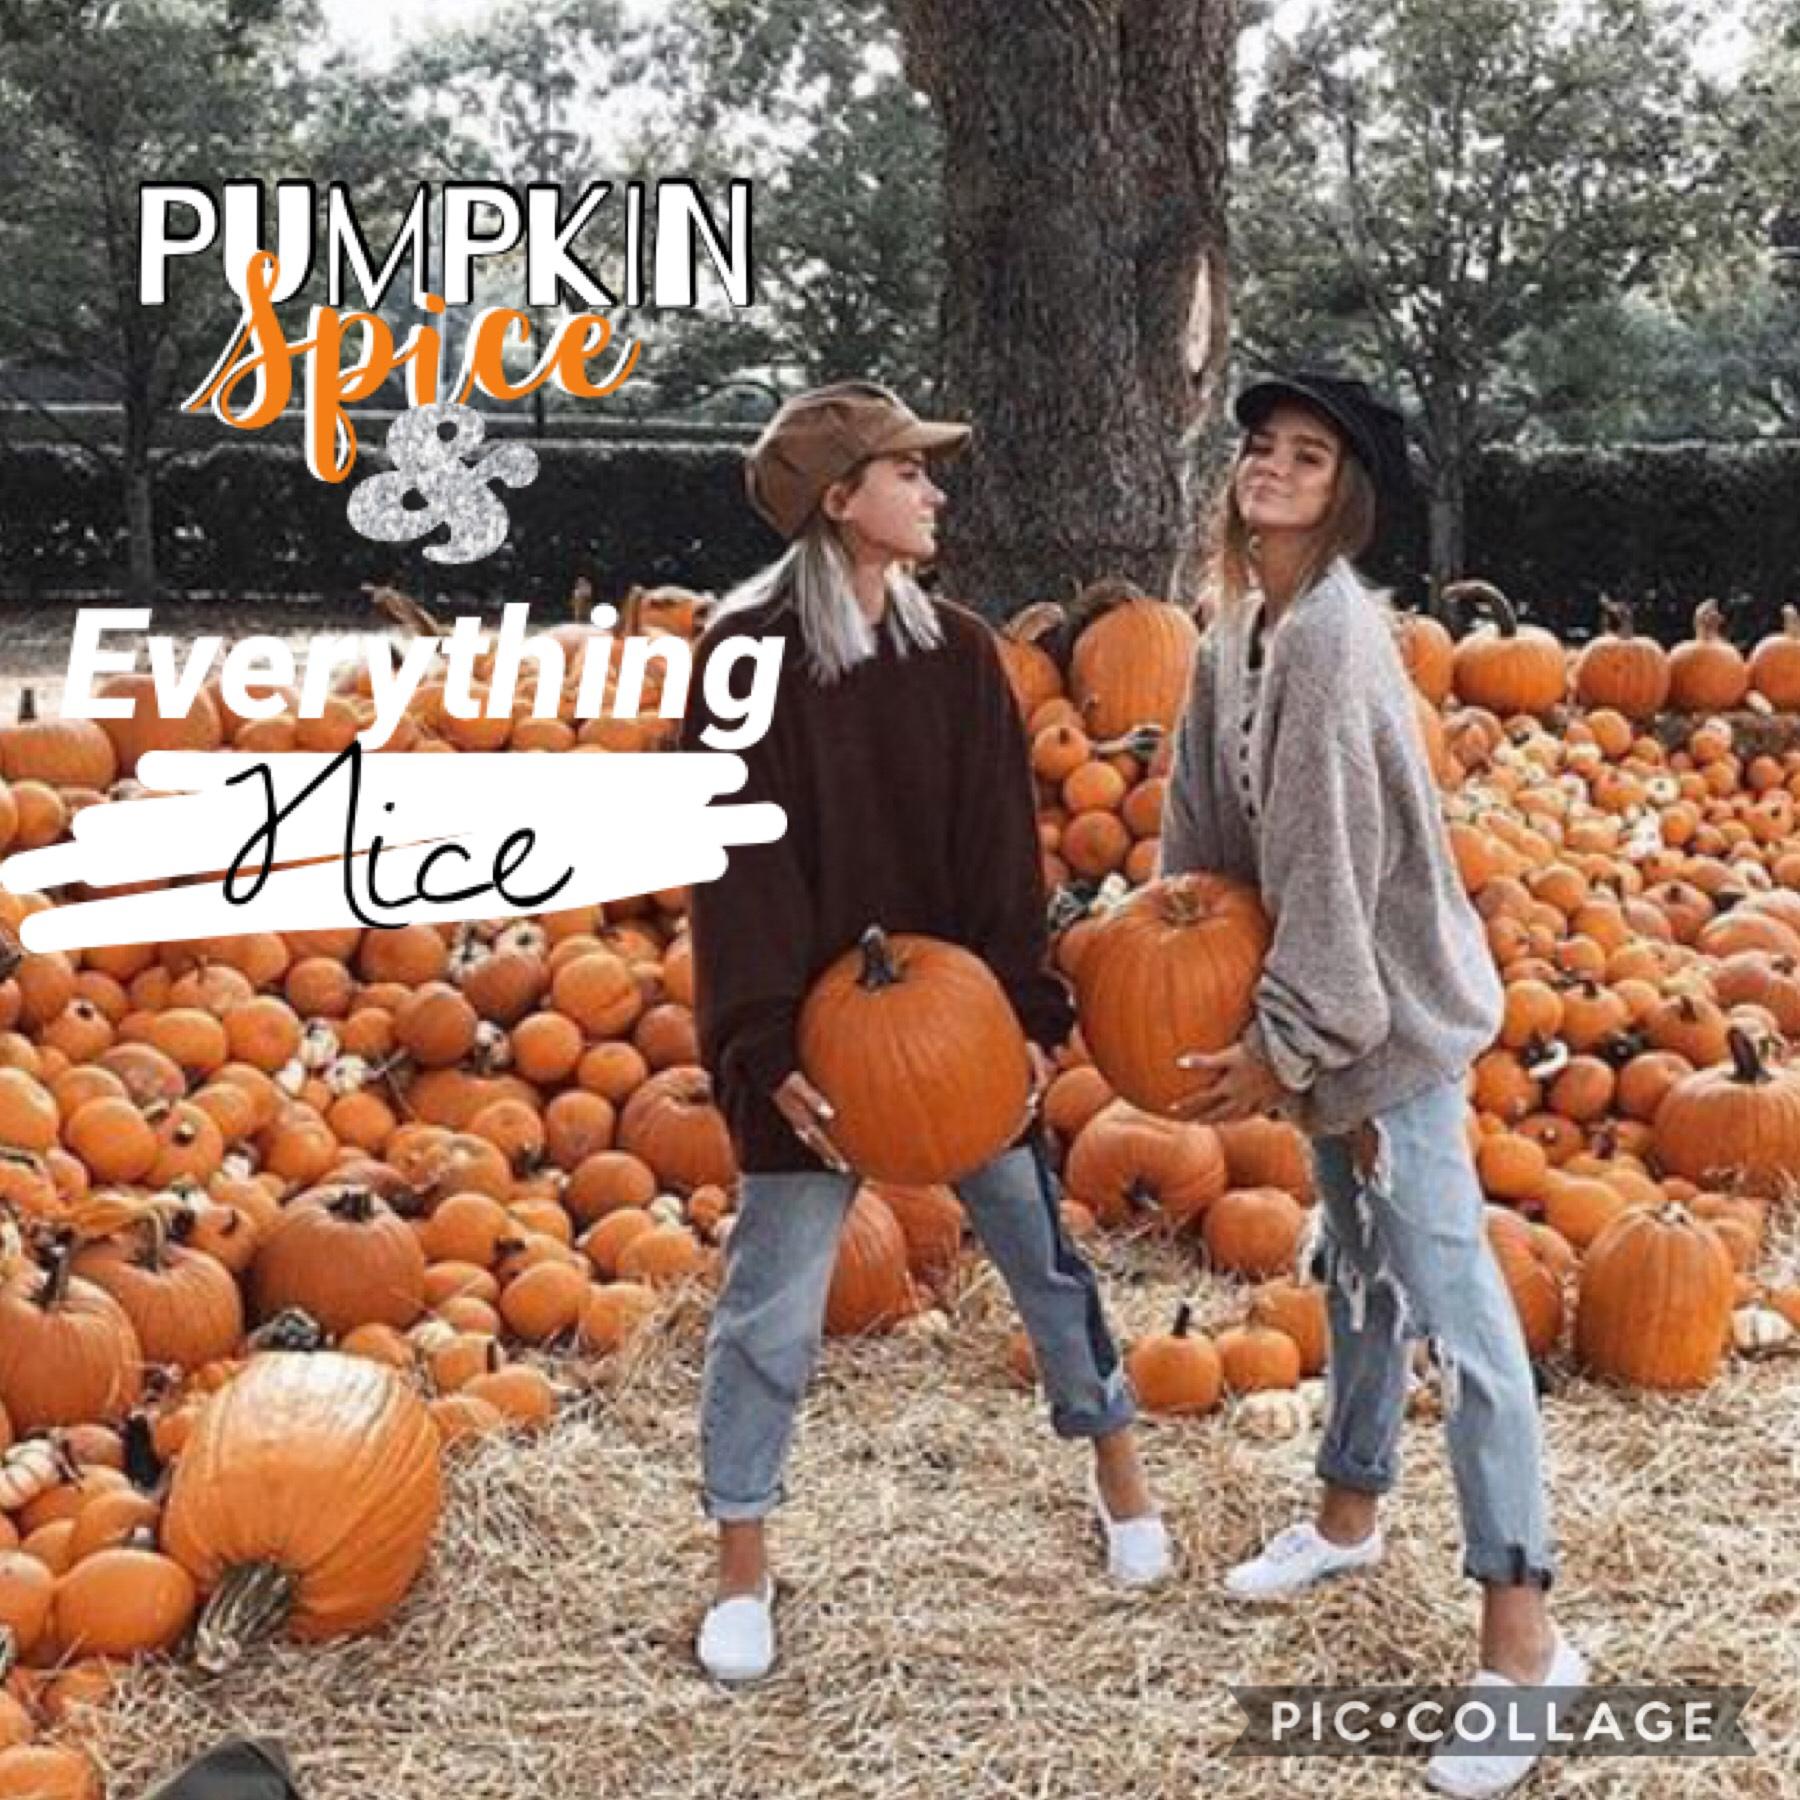 🍂tAp🍂
🎃pυмpĸιn ѕpιce & everyтнιng nιce 🎃
What’s your favorite thing about fall? 